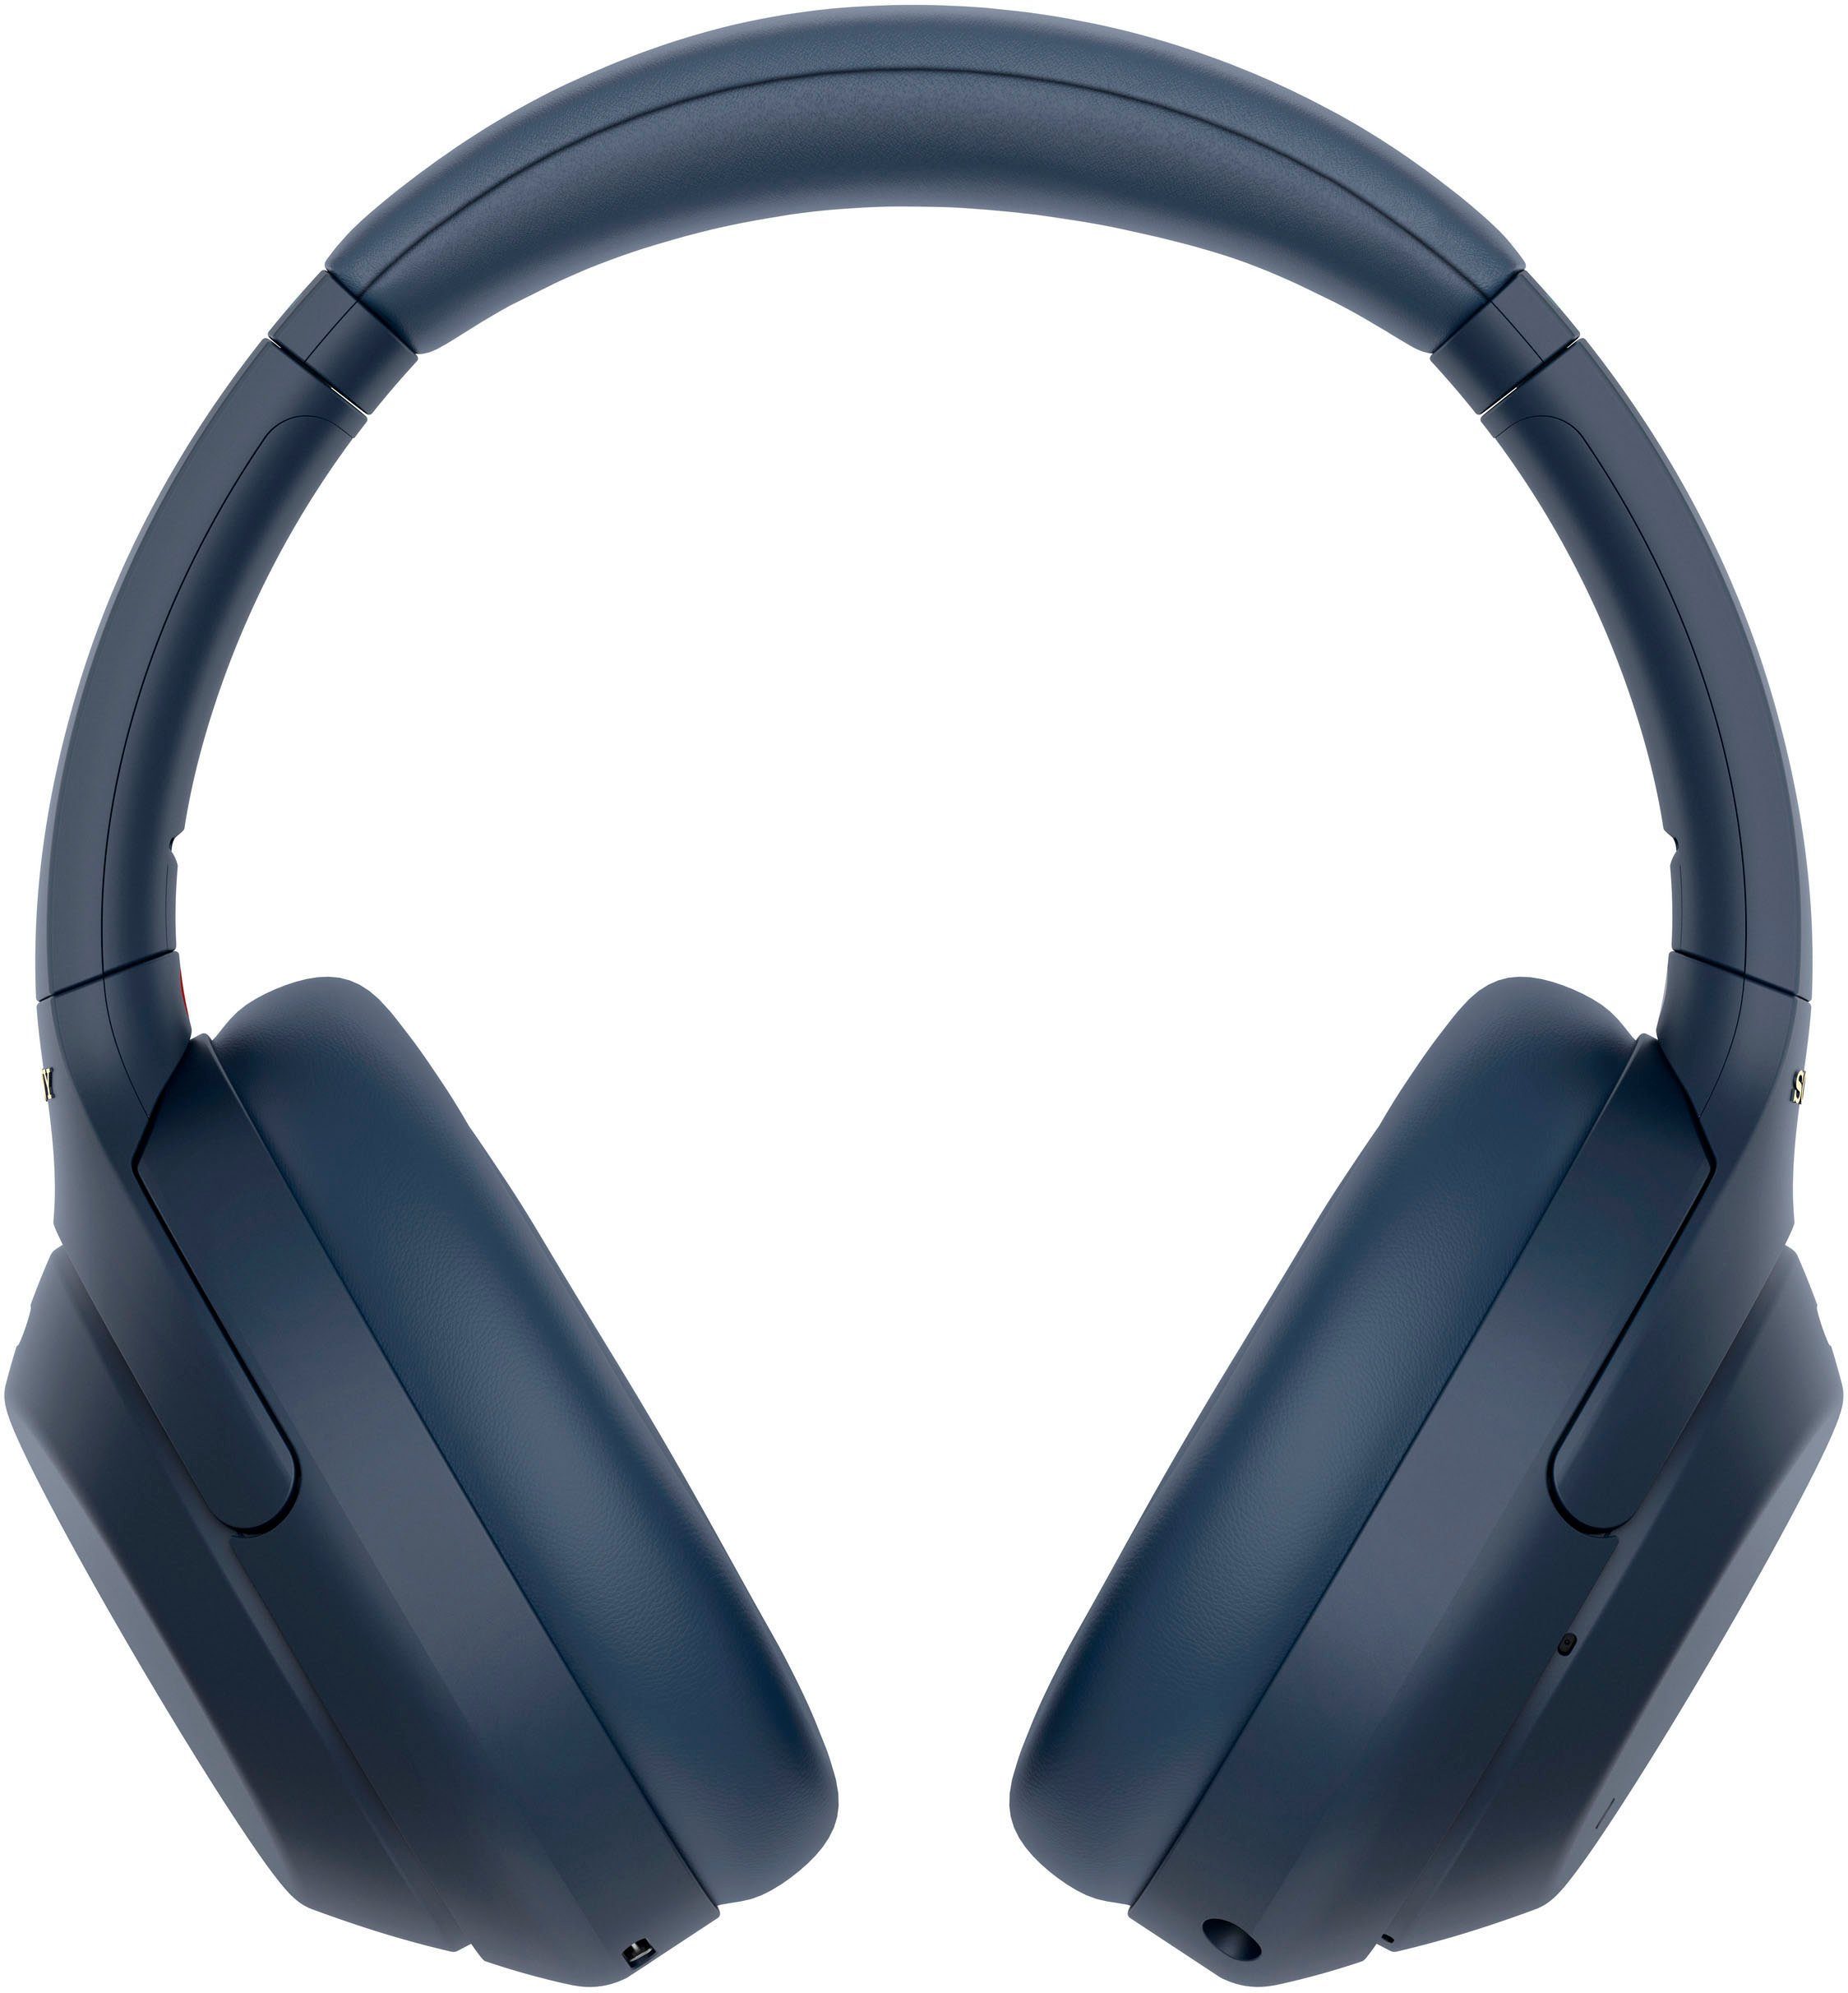 Touch Schnellladefunktion) WH-1000XM4 NFC, NFC, Bluetooth, Sony Verbindung via One-Touch (Noise-Cancelling, blau Over-Ear-Kopfhörer kabelloser Sensor,